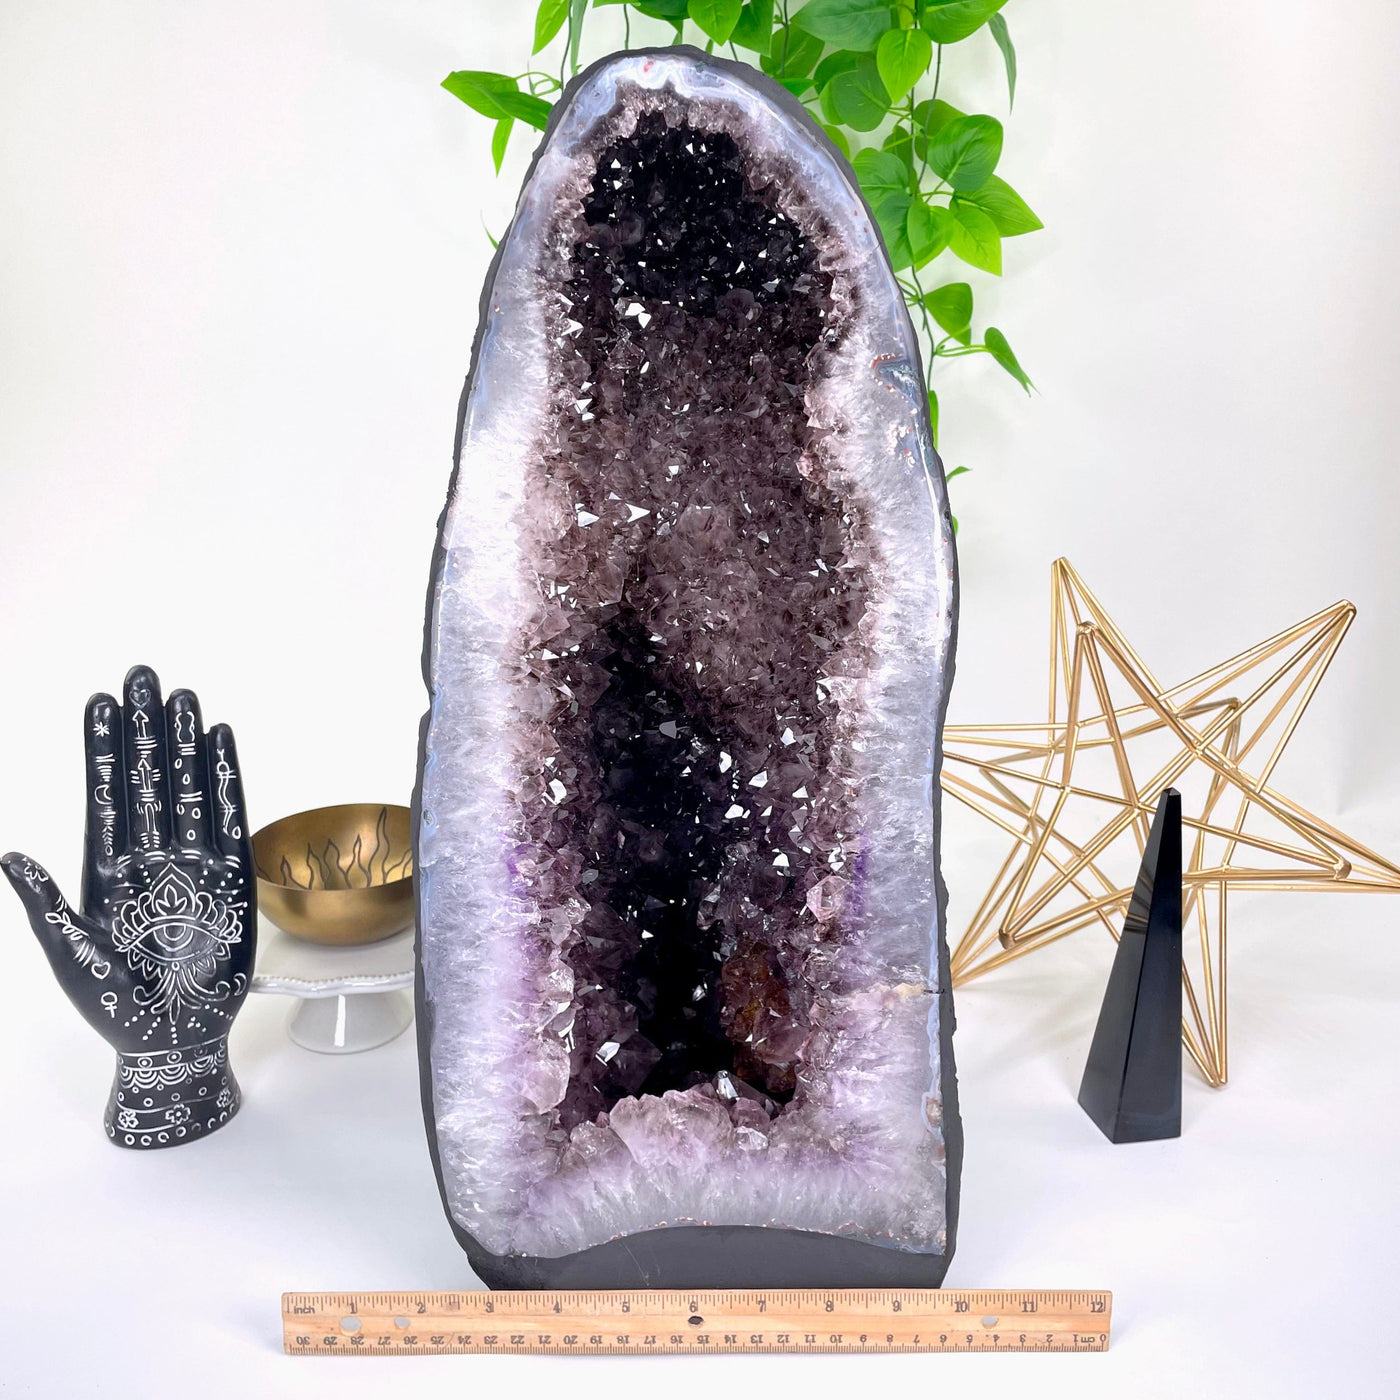 front of amethyst cave geode on display in front of backdrop with horizontal ruler for width reference